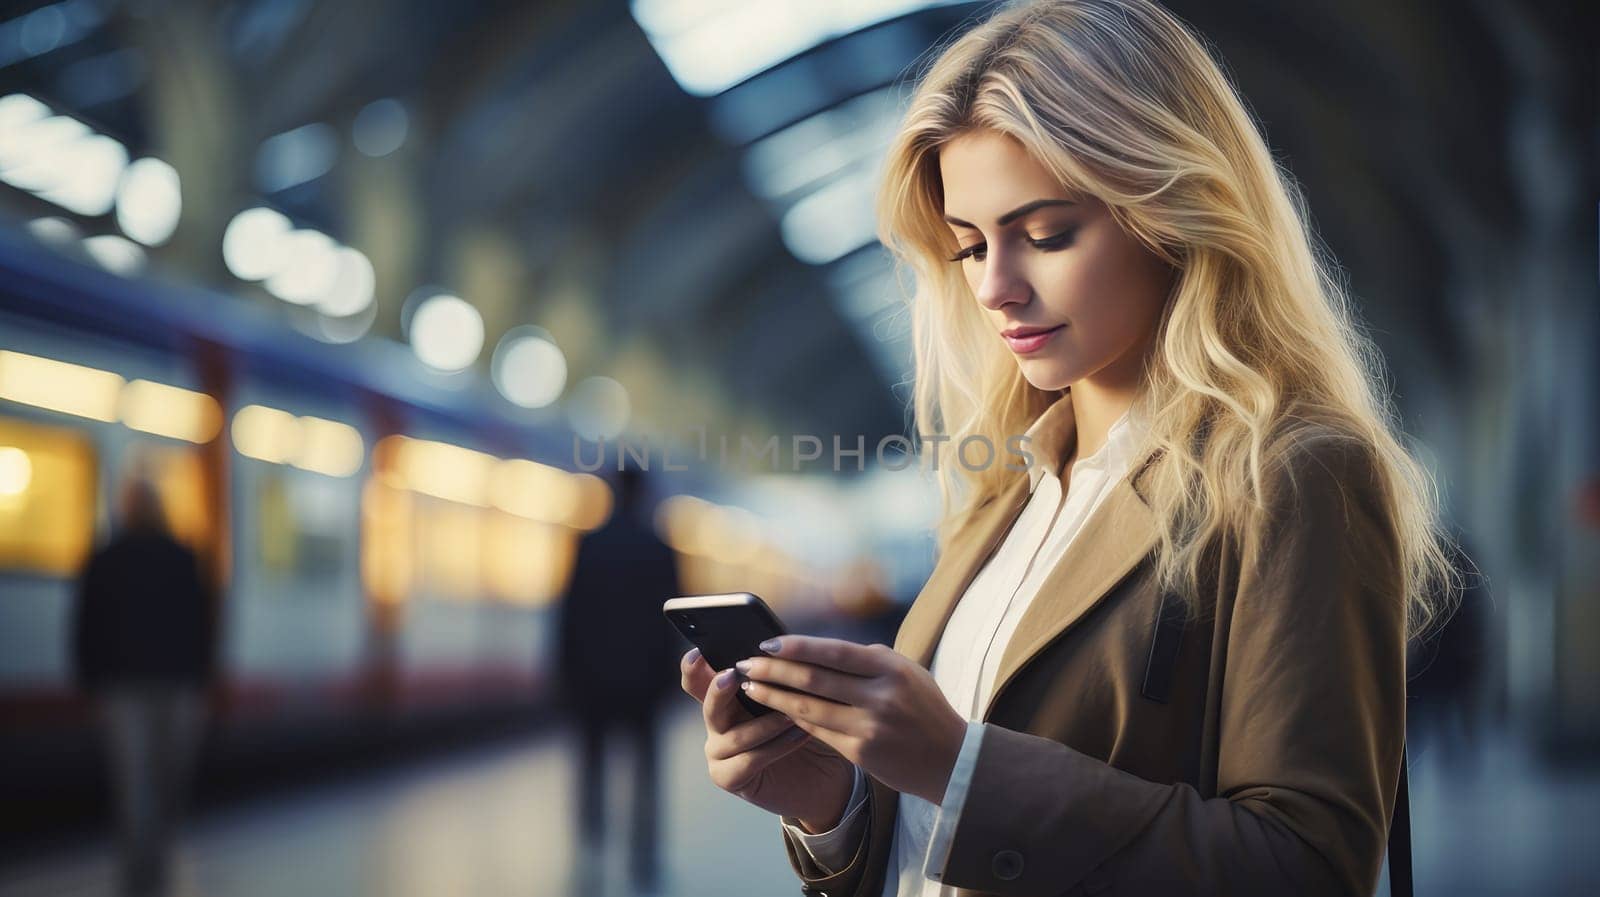 Caucasian young woman with curly hair in a coat and headphones with a smartphone in her hands at the station near a high-speed train. Business trip, rail travel, tourism and leisure